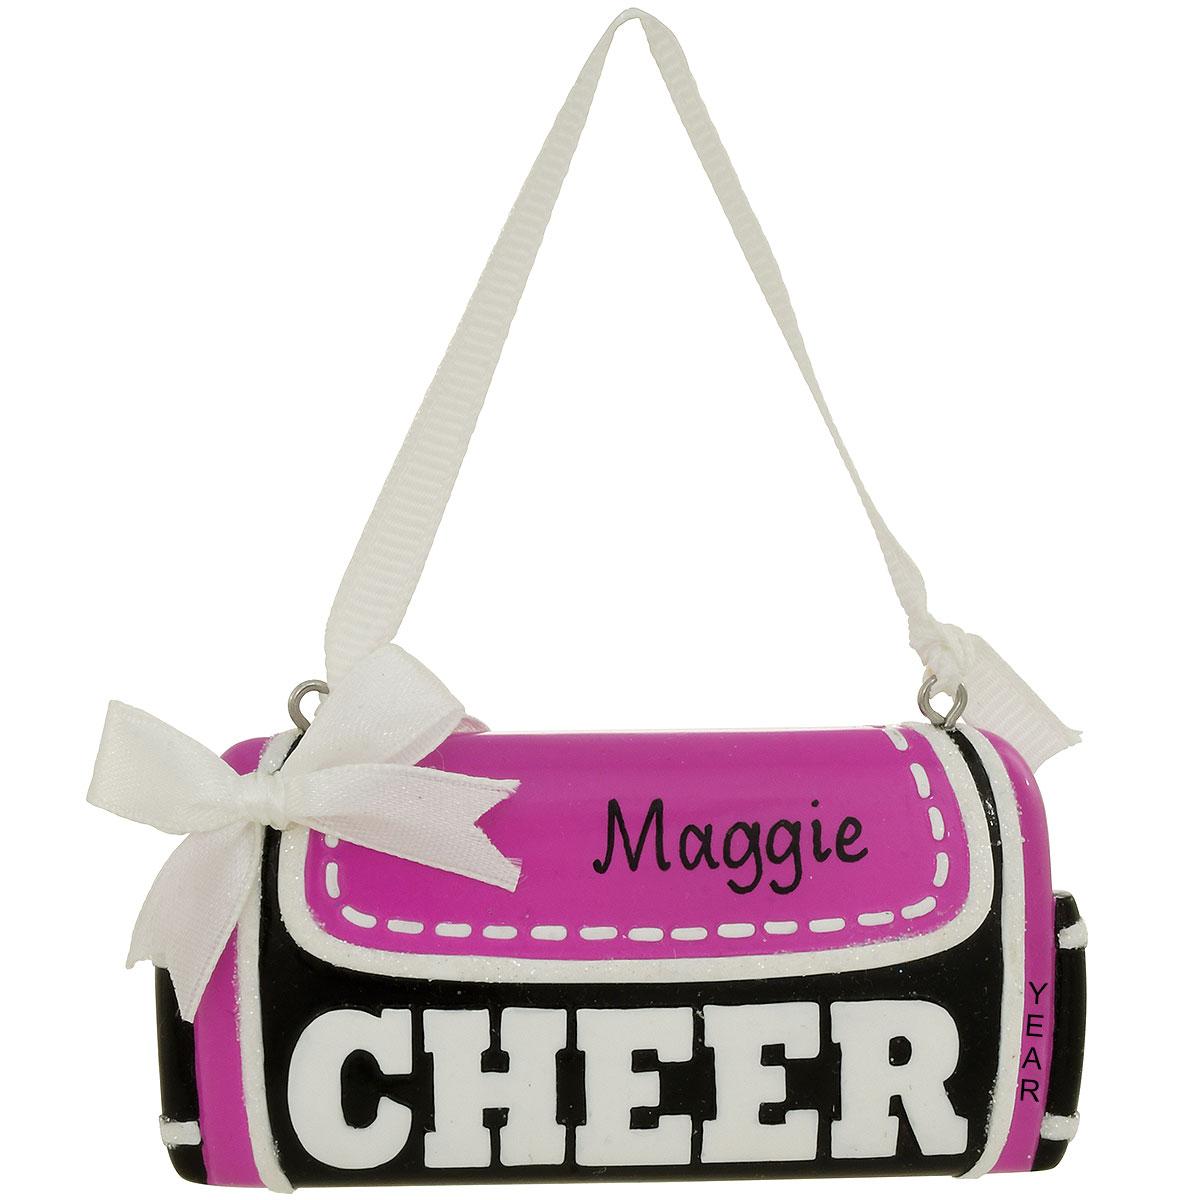 Personalized Cheer Bag Ornament